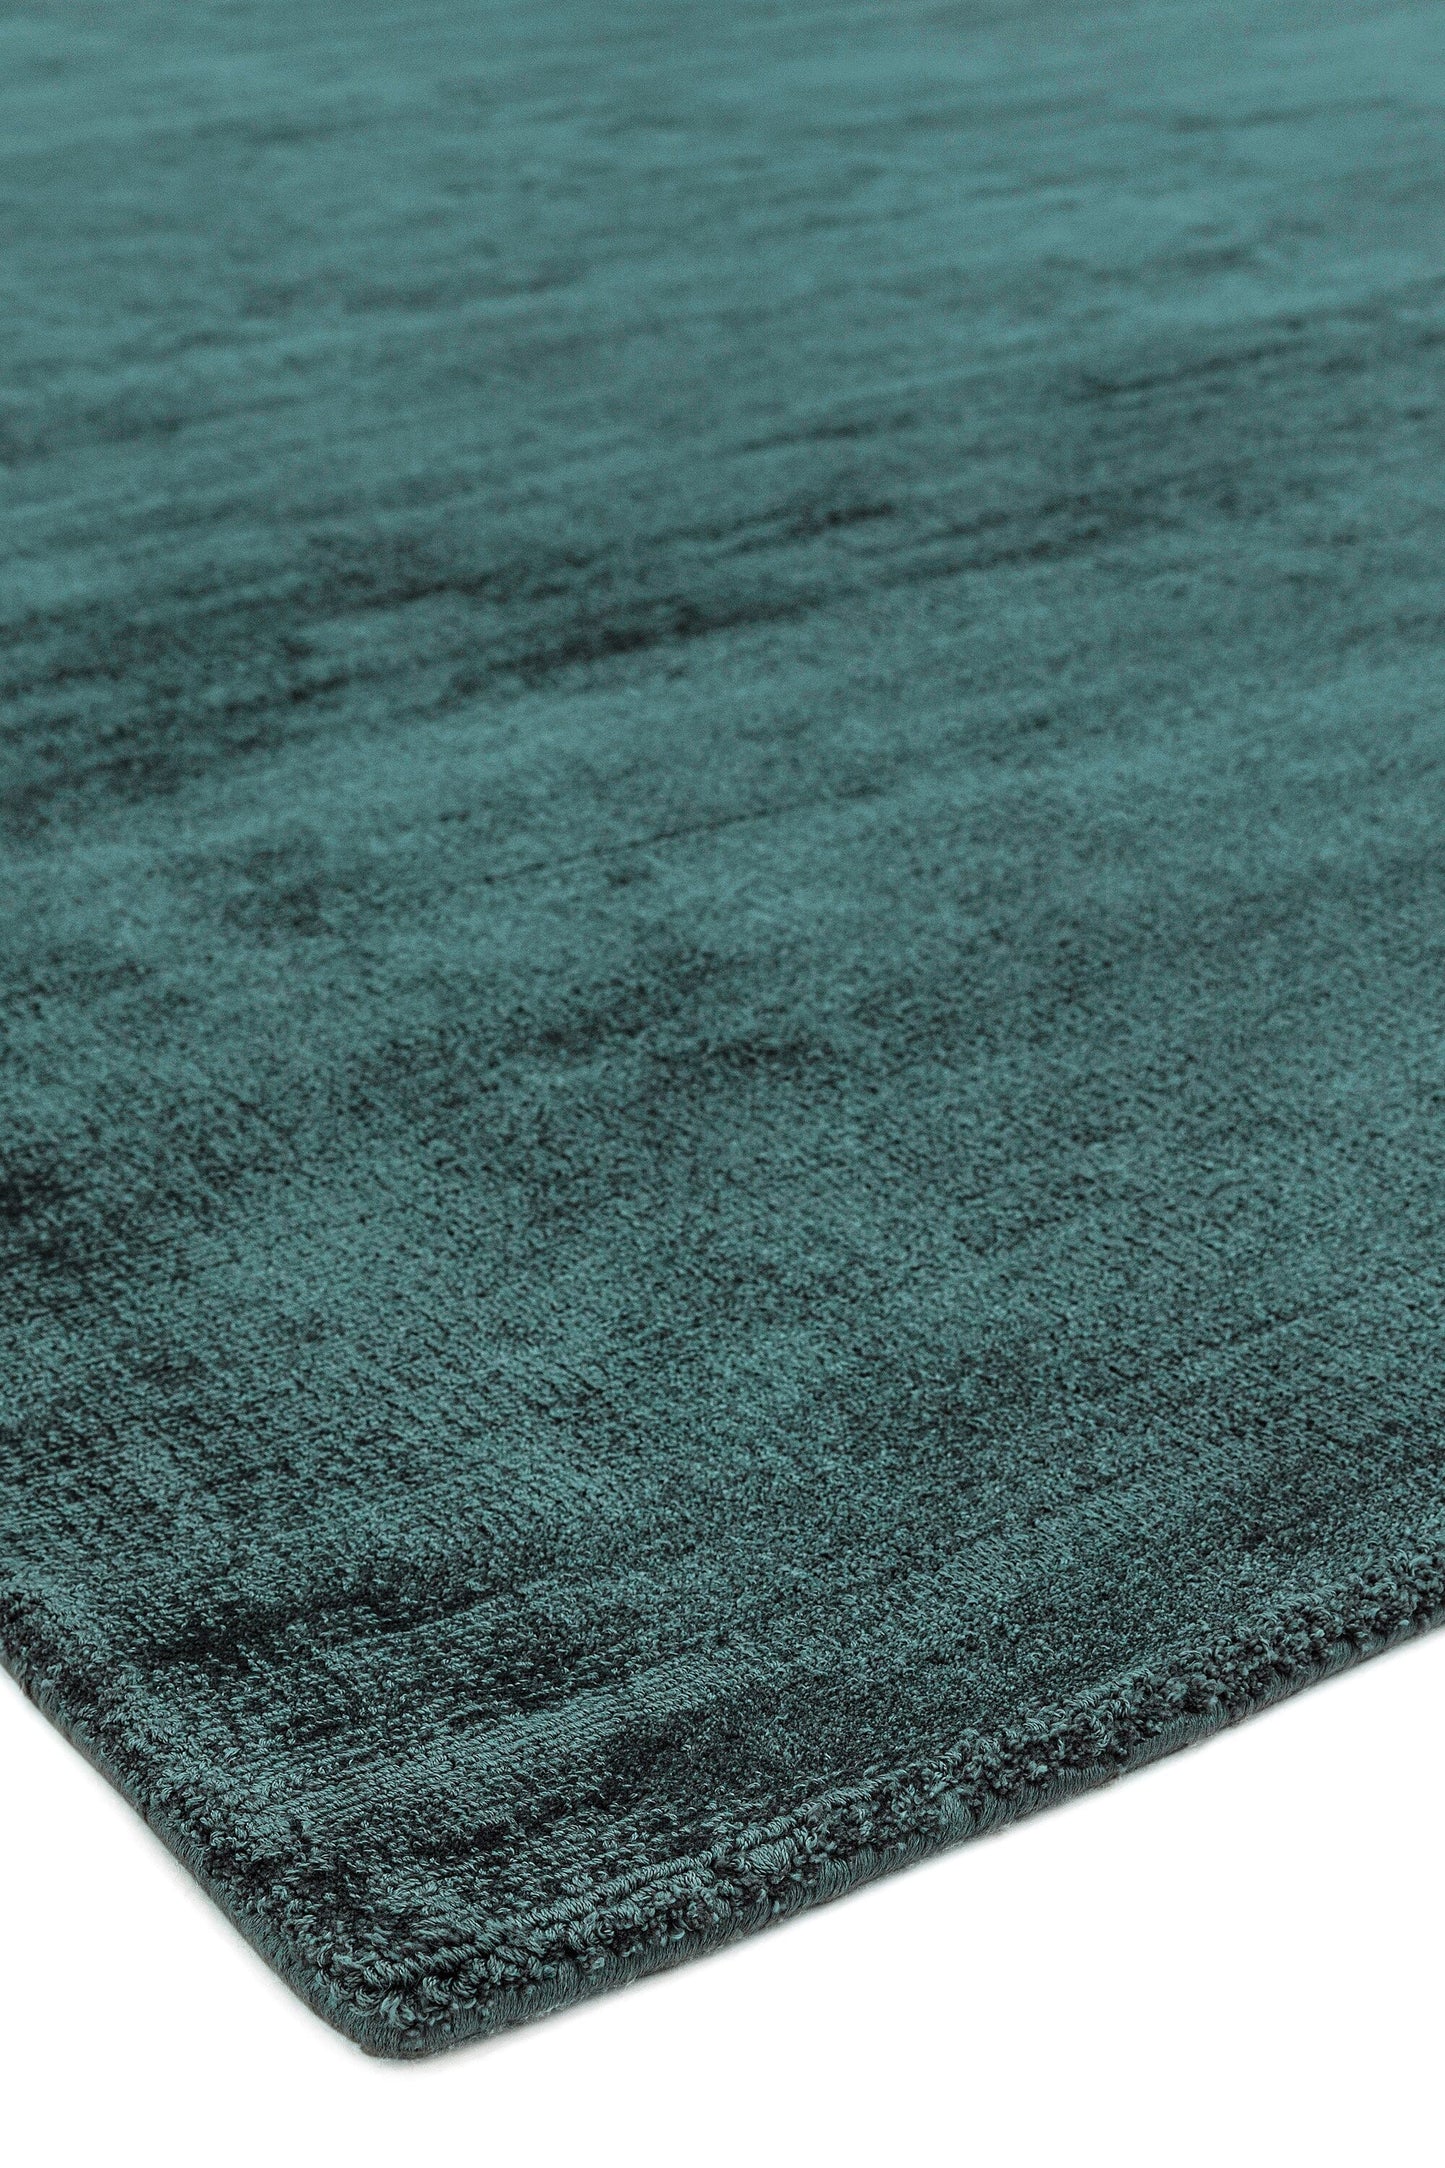 Asiatic Carpets Blade Hand Woven Runner Teal - 66 x 240cm